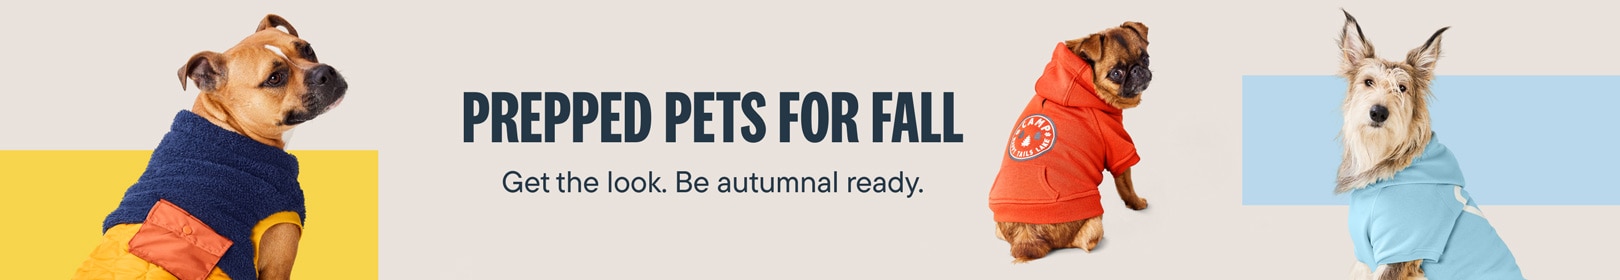 Prepped Pets for Fall - Get the look. Be autumnal ready.